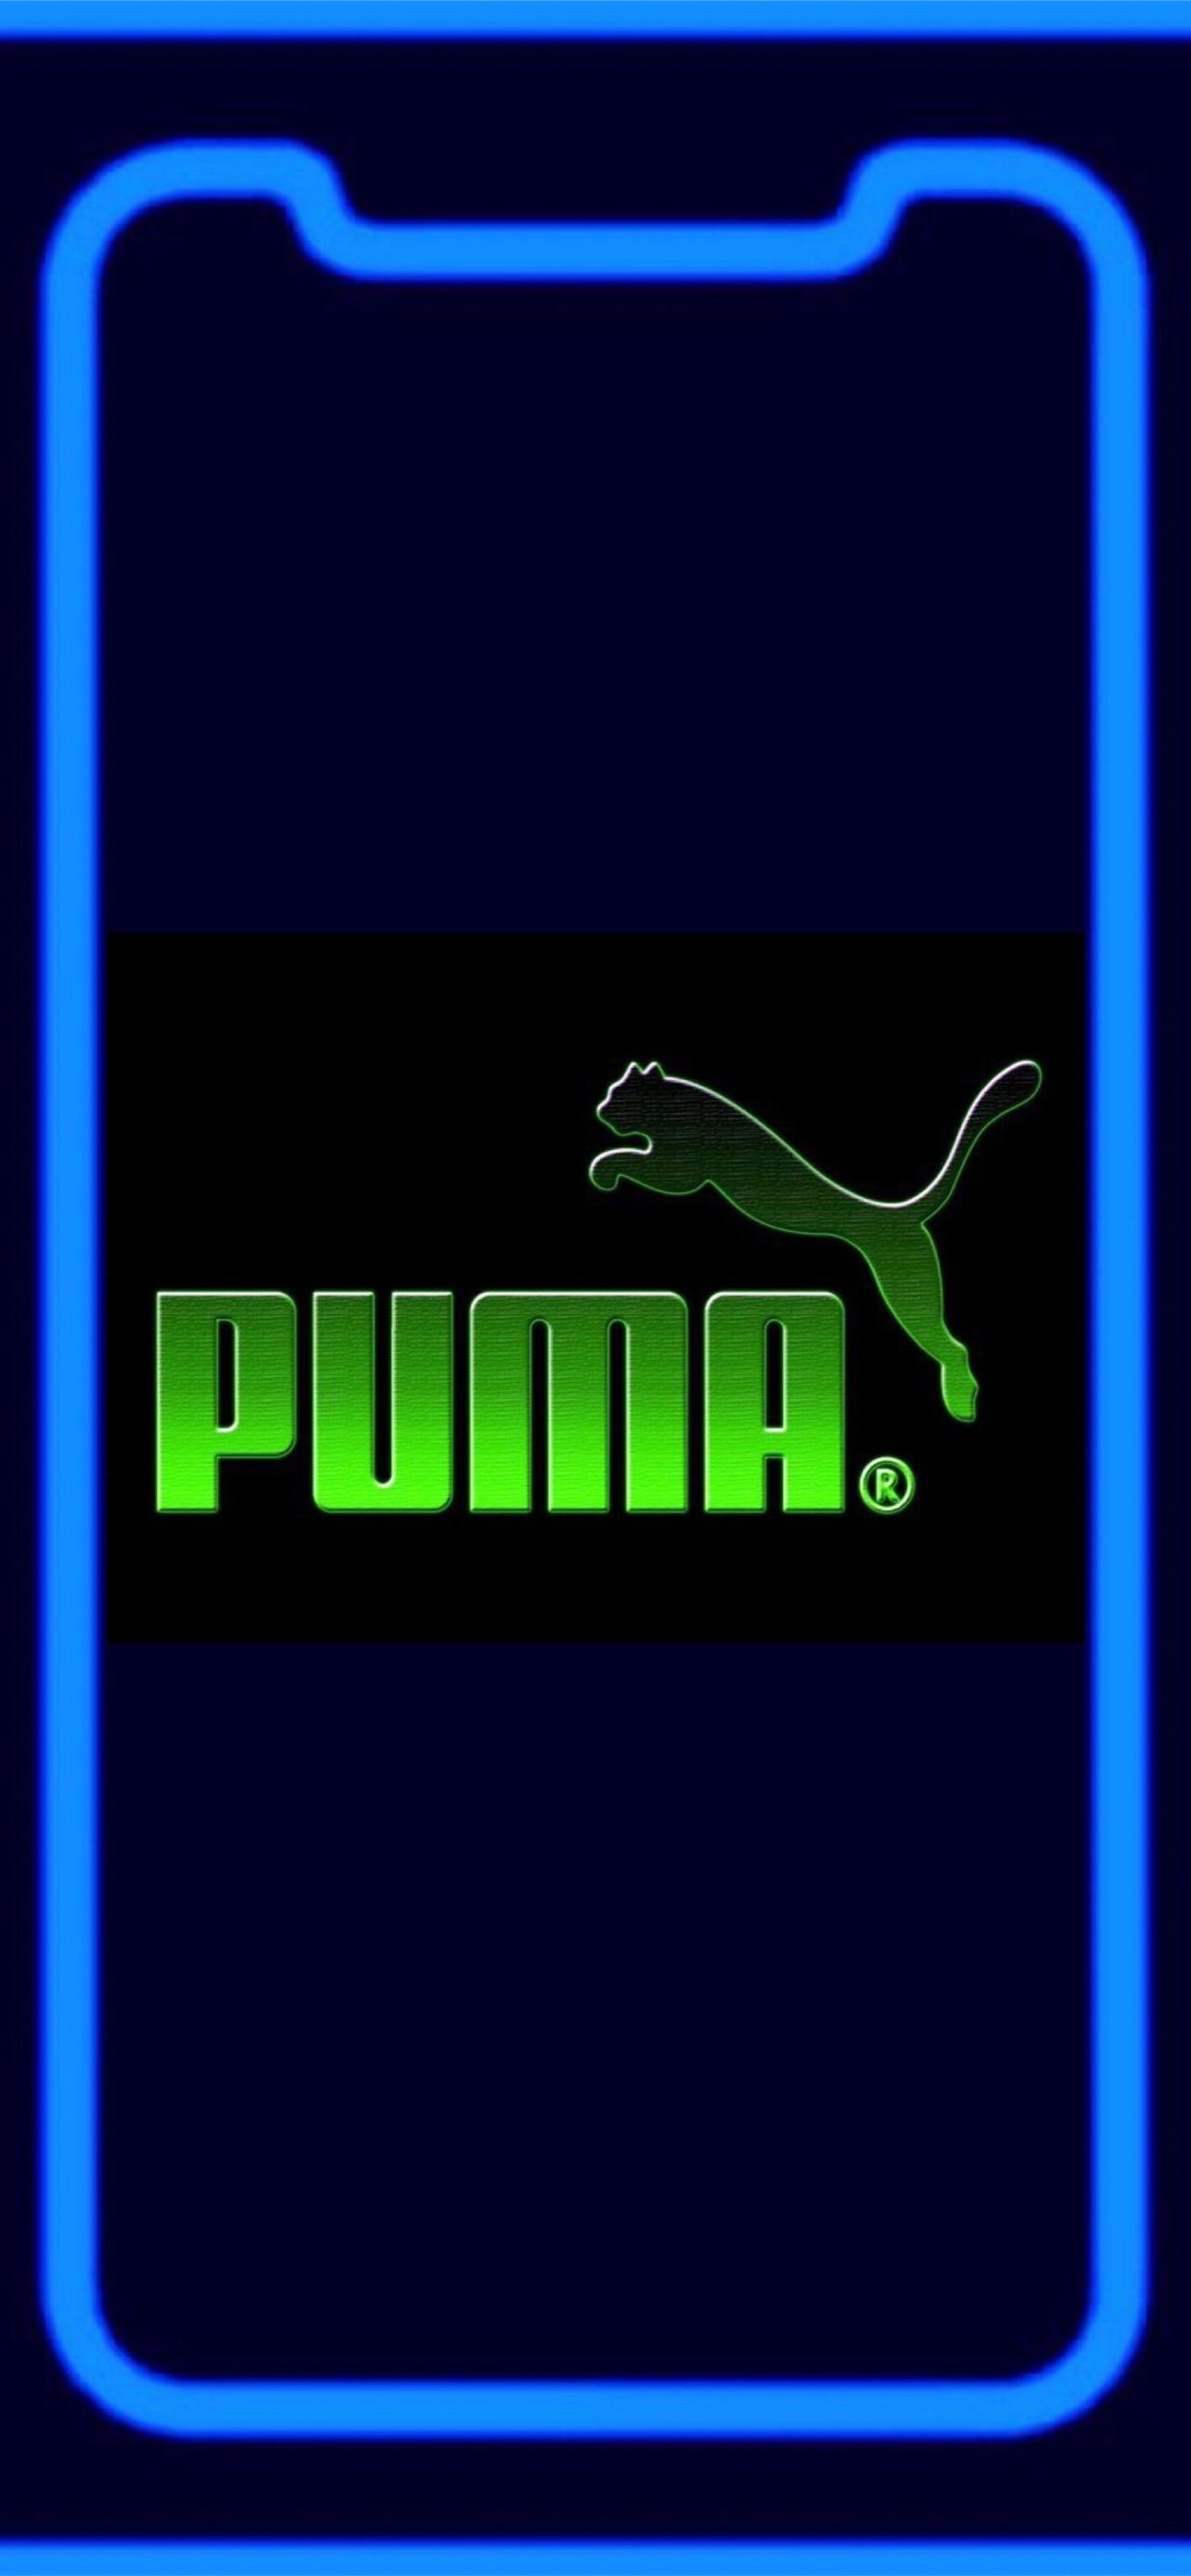 Puma 55 Top Free Puma Backgrounds For Pc Iphone Wallpapers Free Download